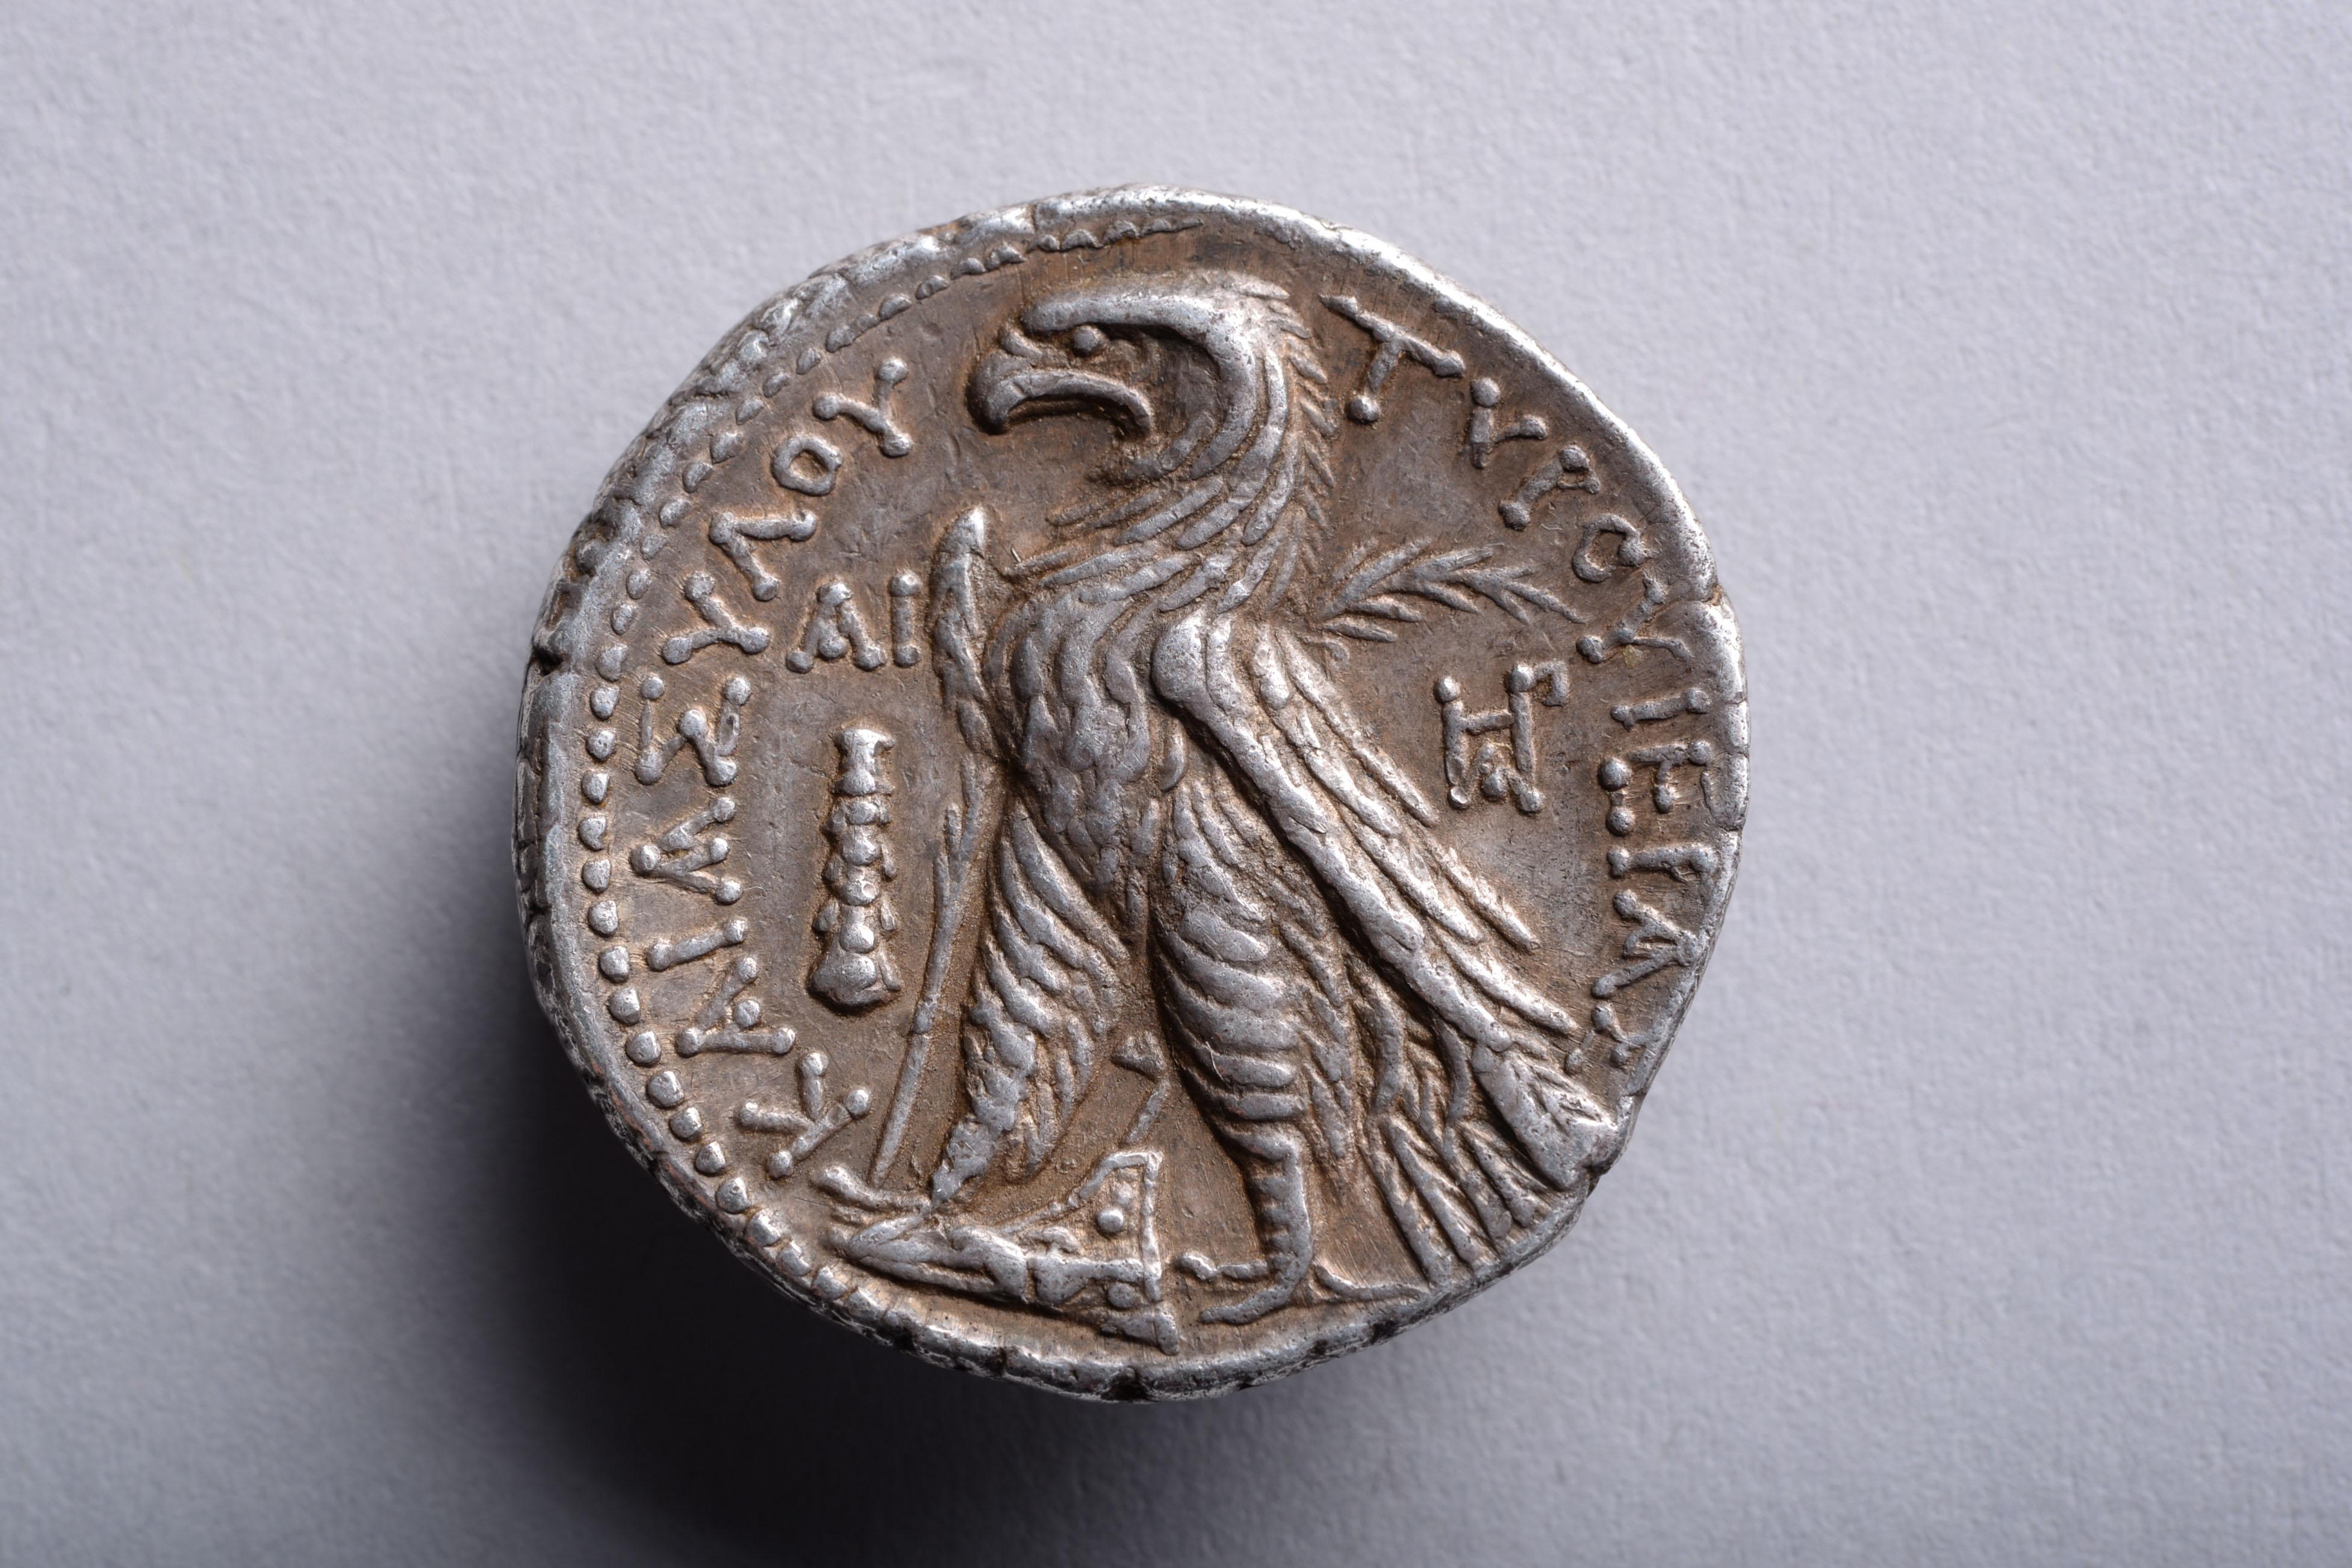 A silver shekel from the city of Tyre, minted in year 11 of the Tyrian calendar, 116-115 BC.

The obverse with the portrait of the God Melqart, chief deity of Tyre, wearing a laurel wreath.

The reverse with an eagle, standing on a ship’s prow, with